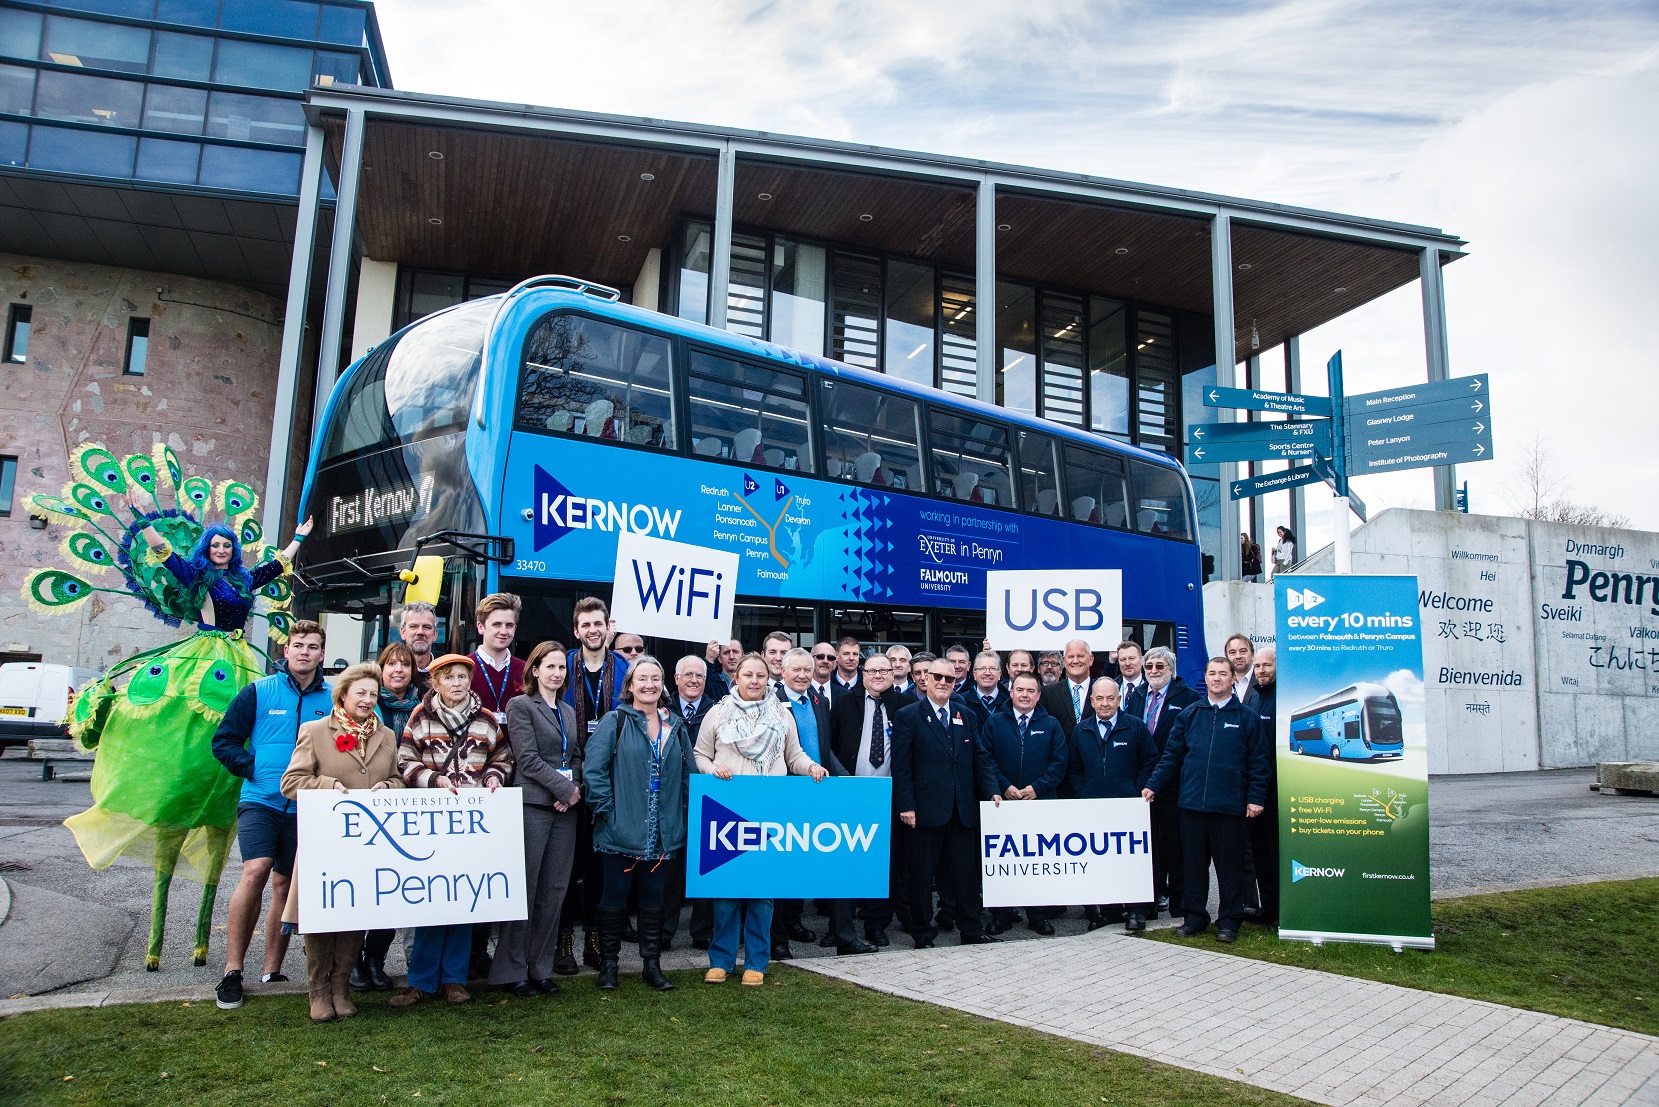 New Fleet Of High-Tech Buses For Falmouth